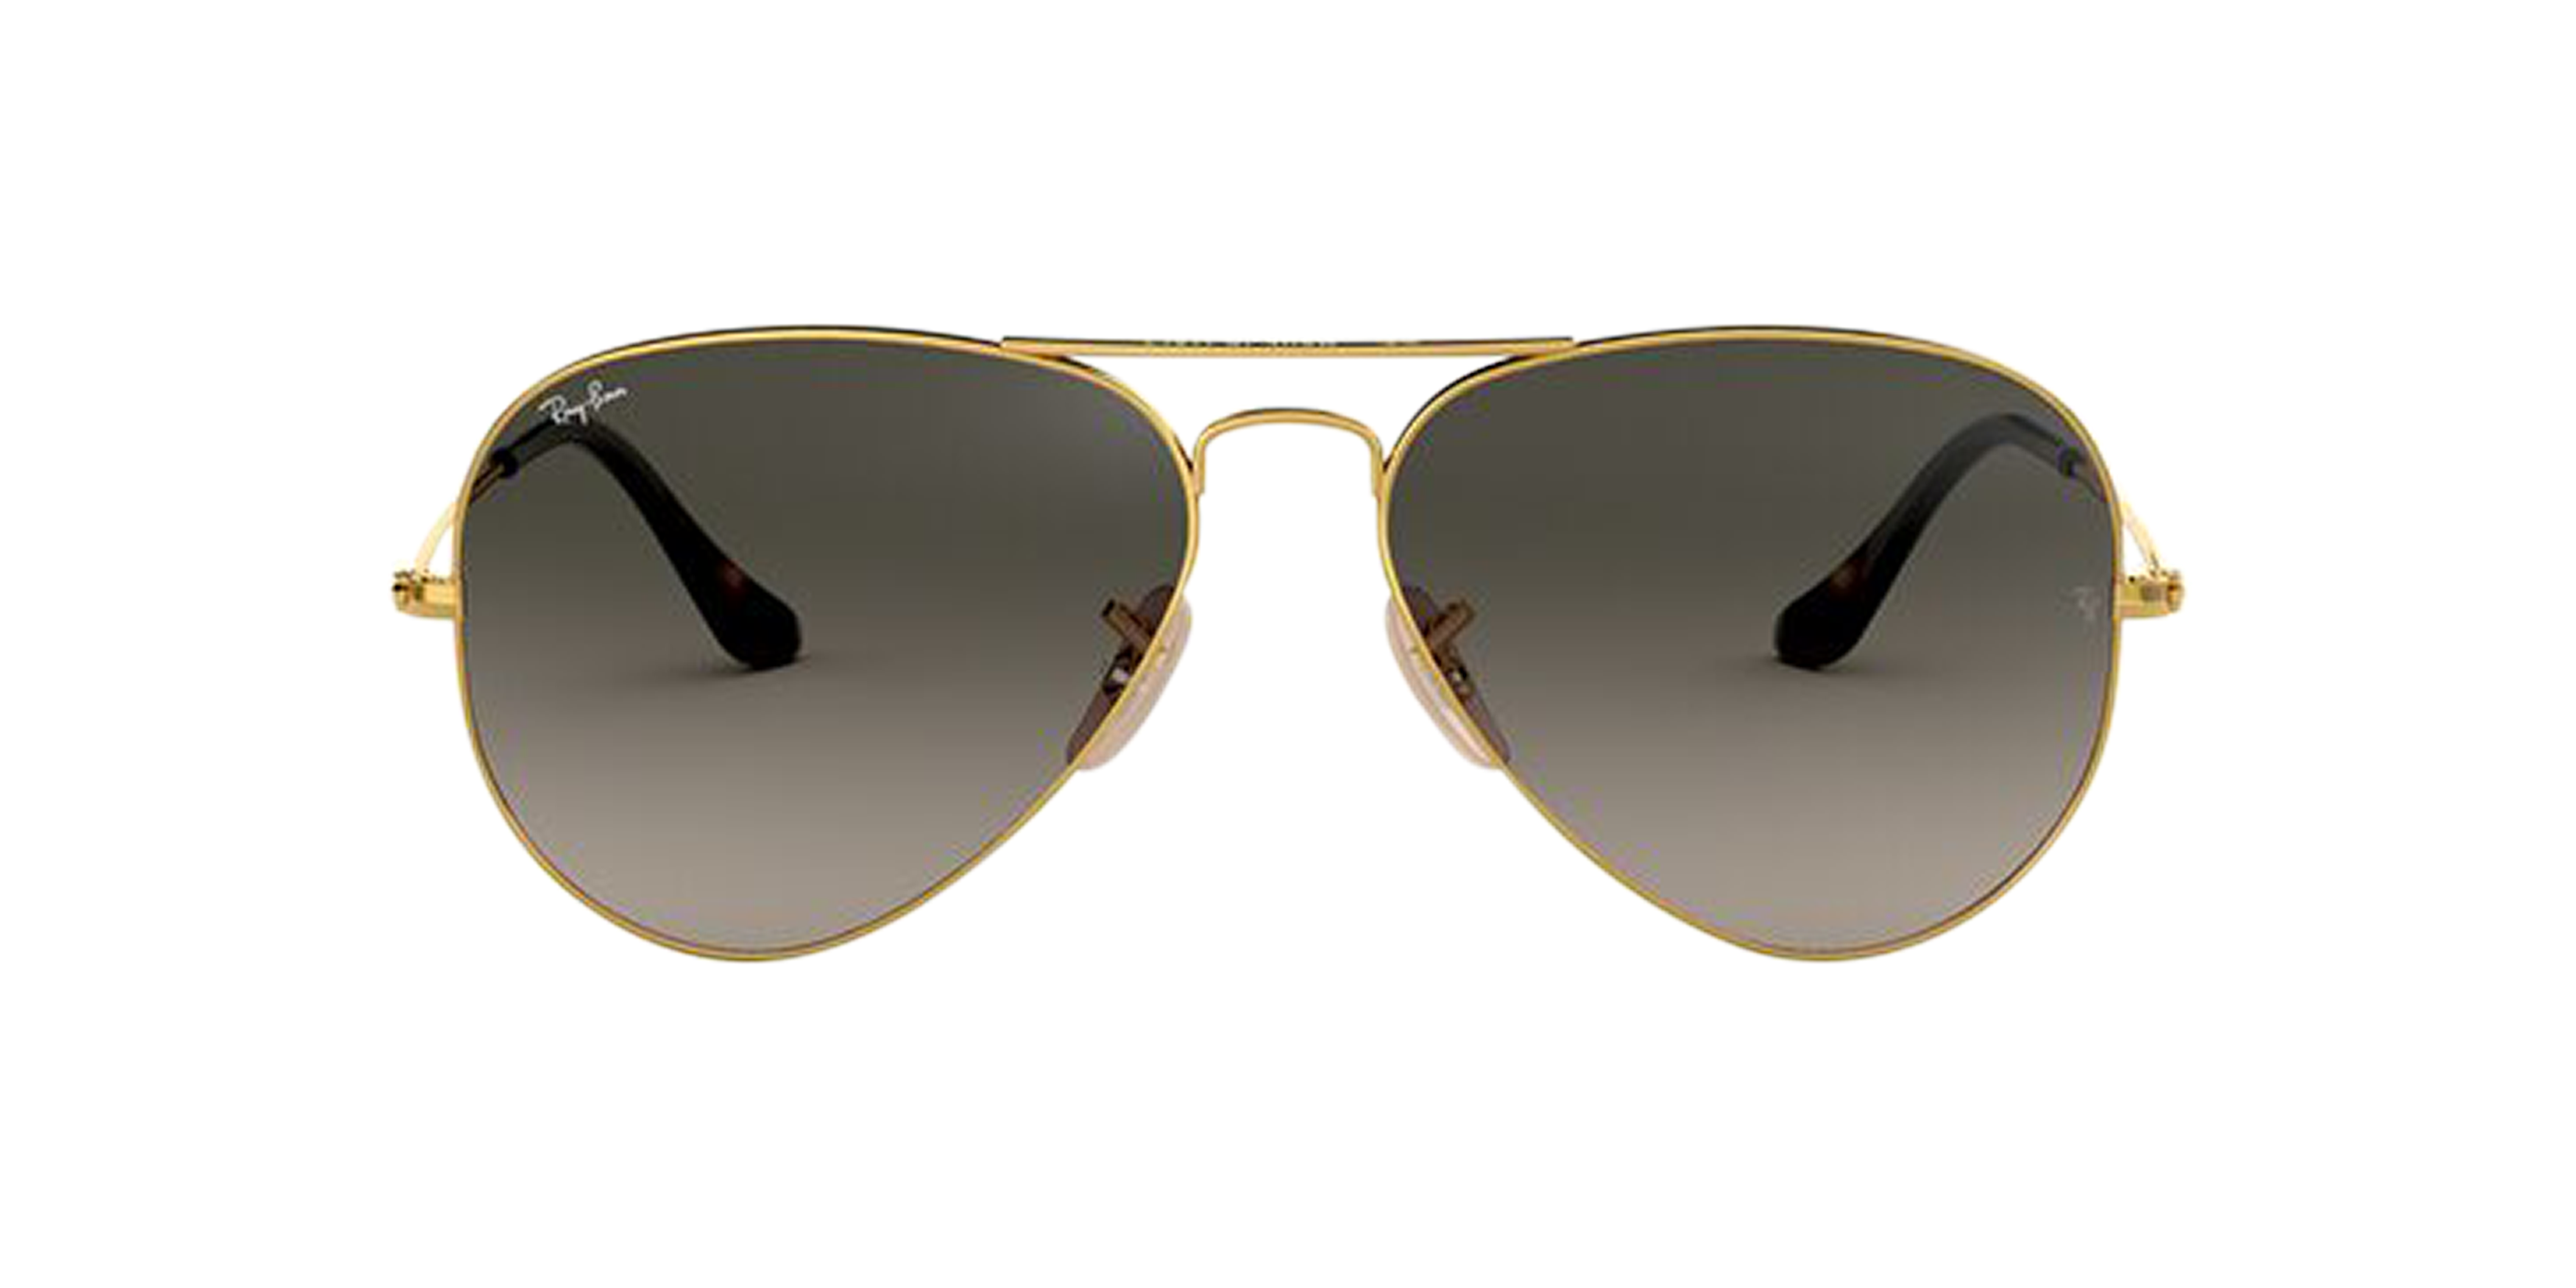 [products.image.front] RAY-BAN RB3025 181/71